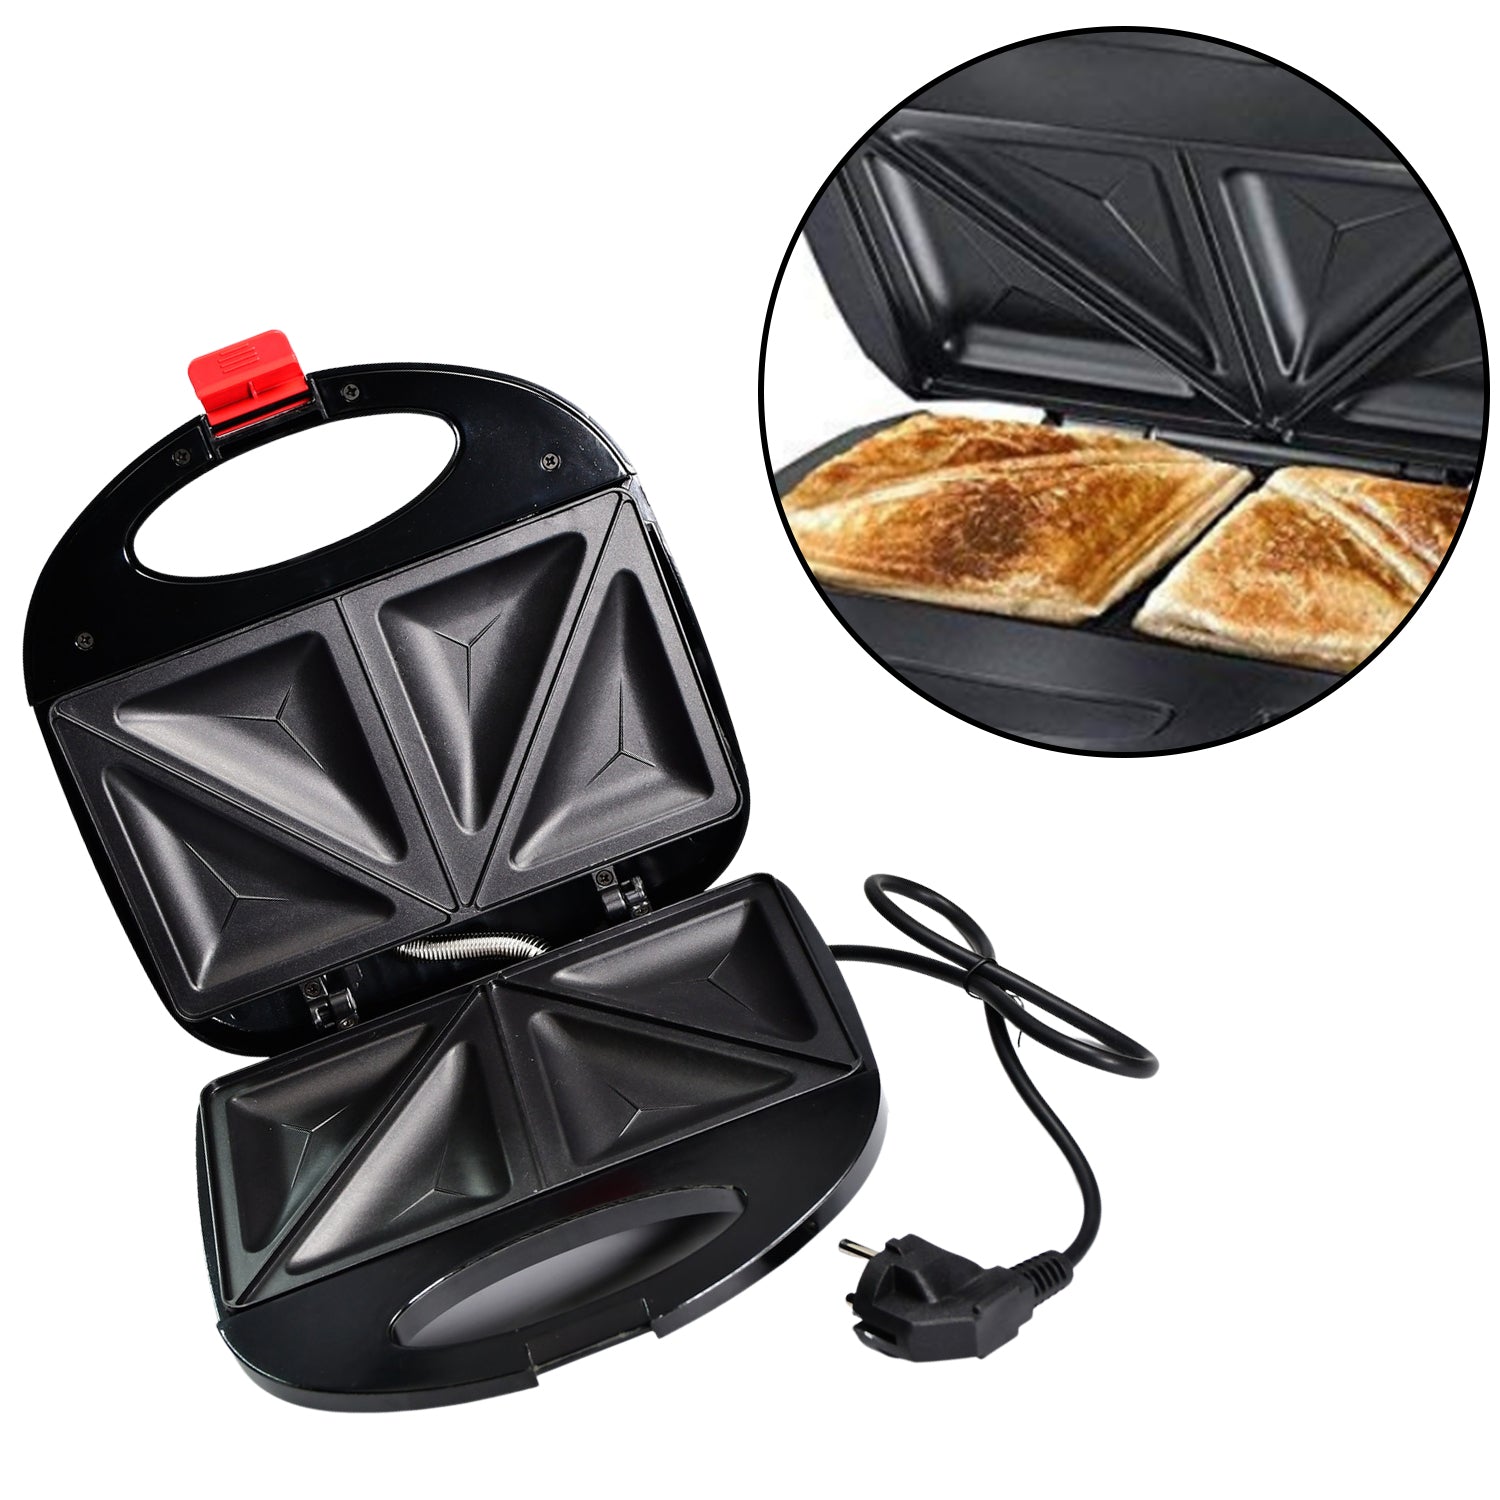 2819 Sandwich Maker Makes Sandwich Non-Stick Plates| Easy to Use with Indicator Lights DeoDap